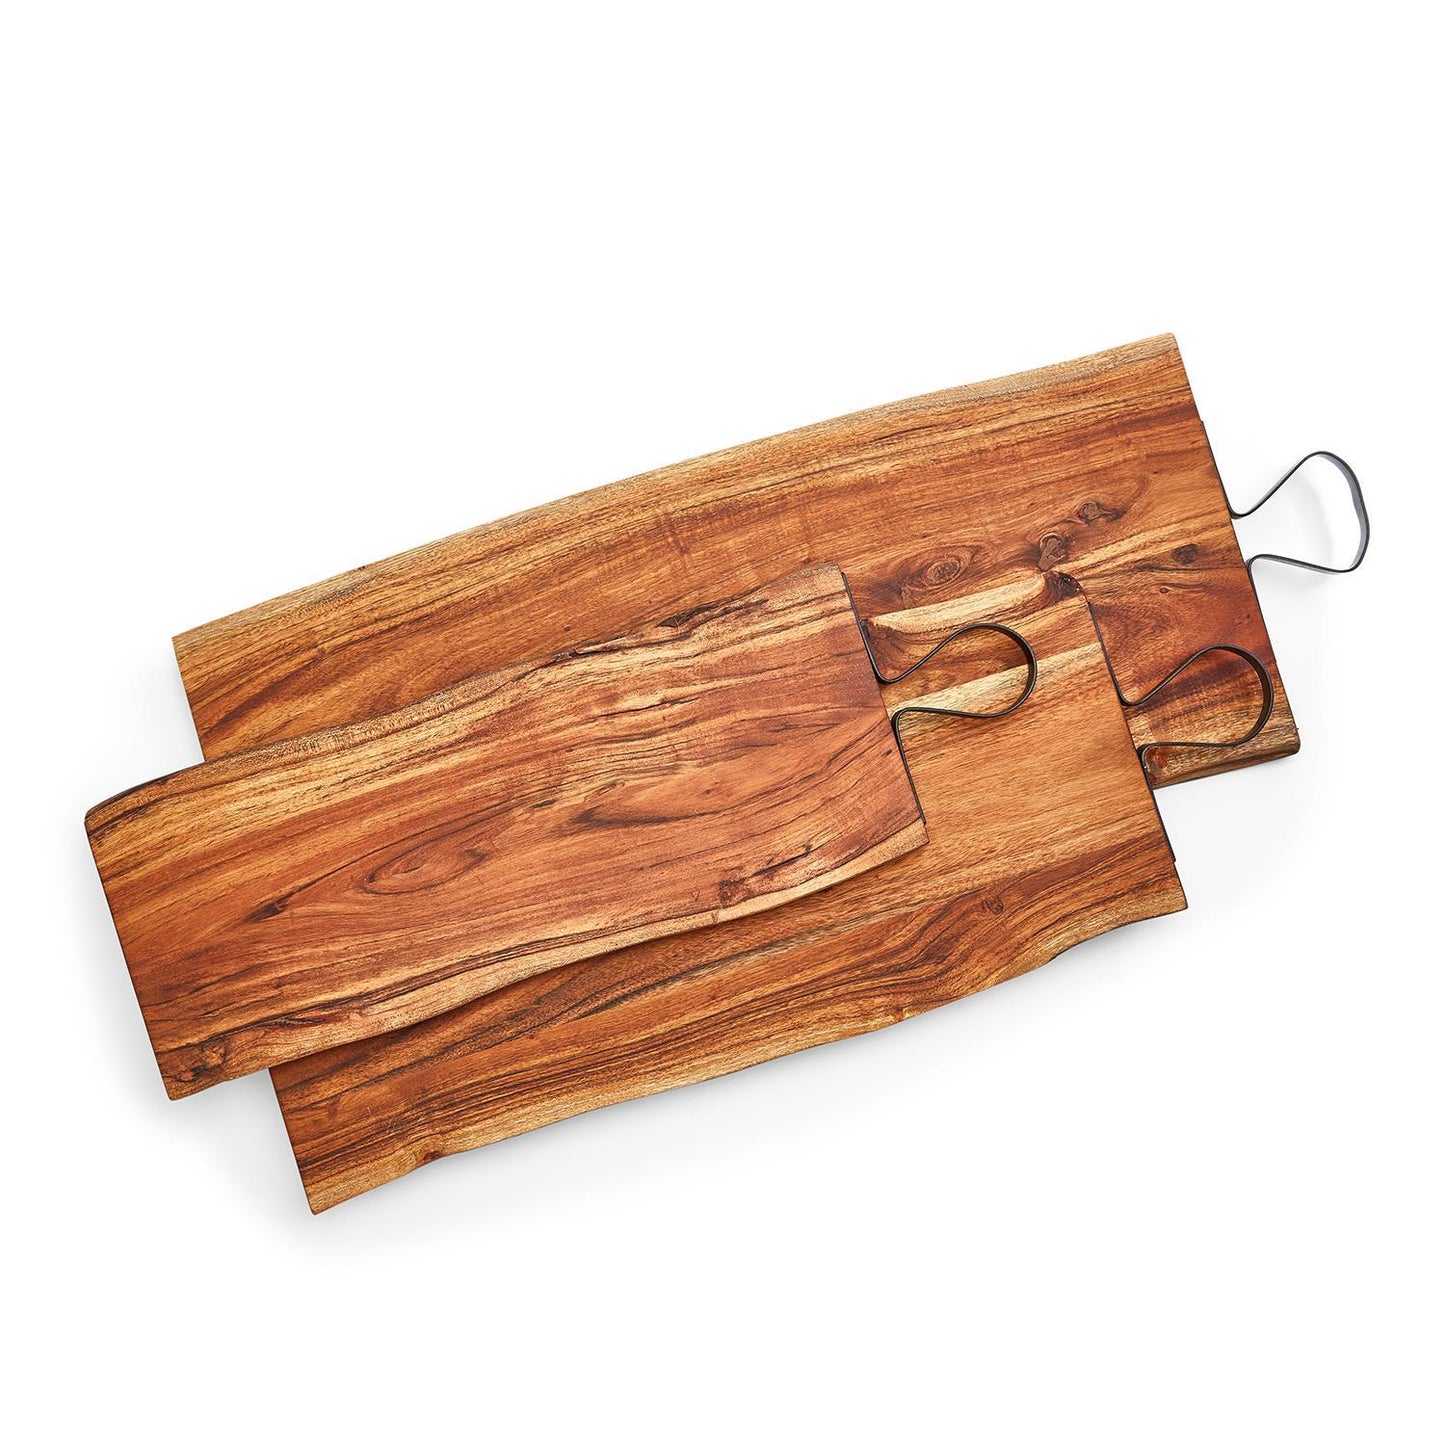 Serving Boards with Iron Handles